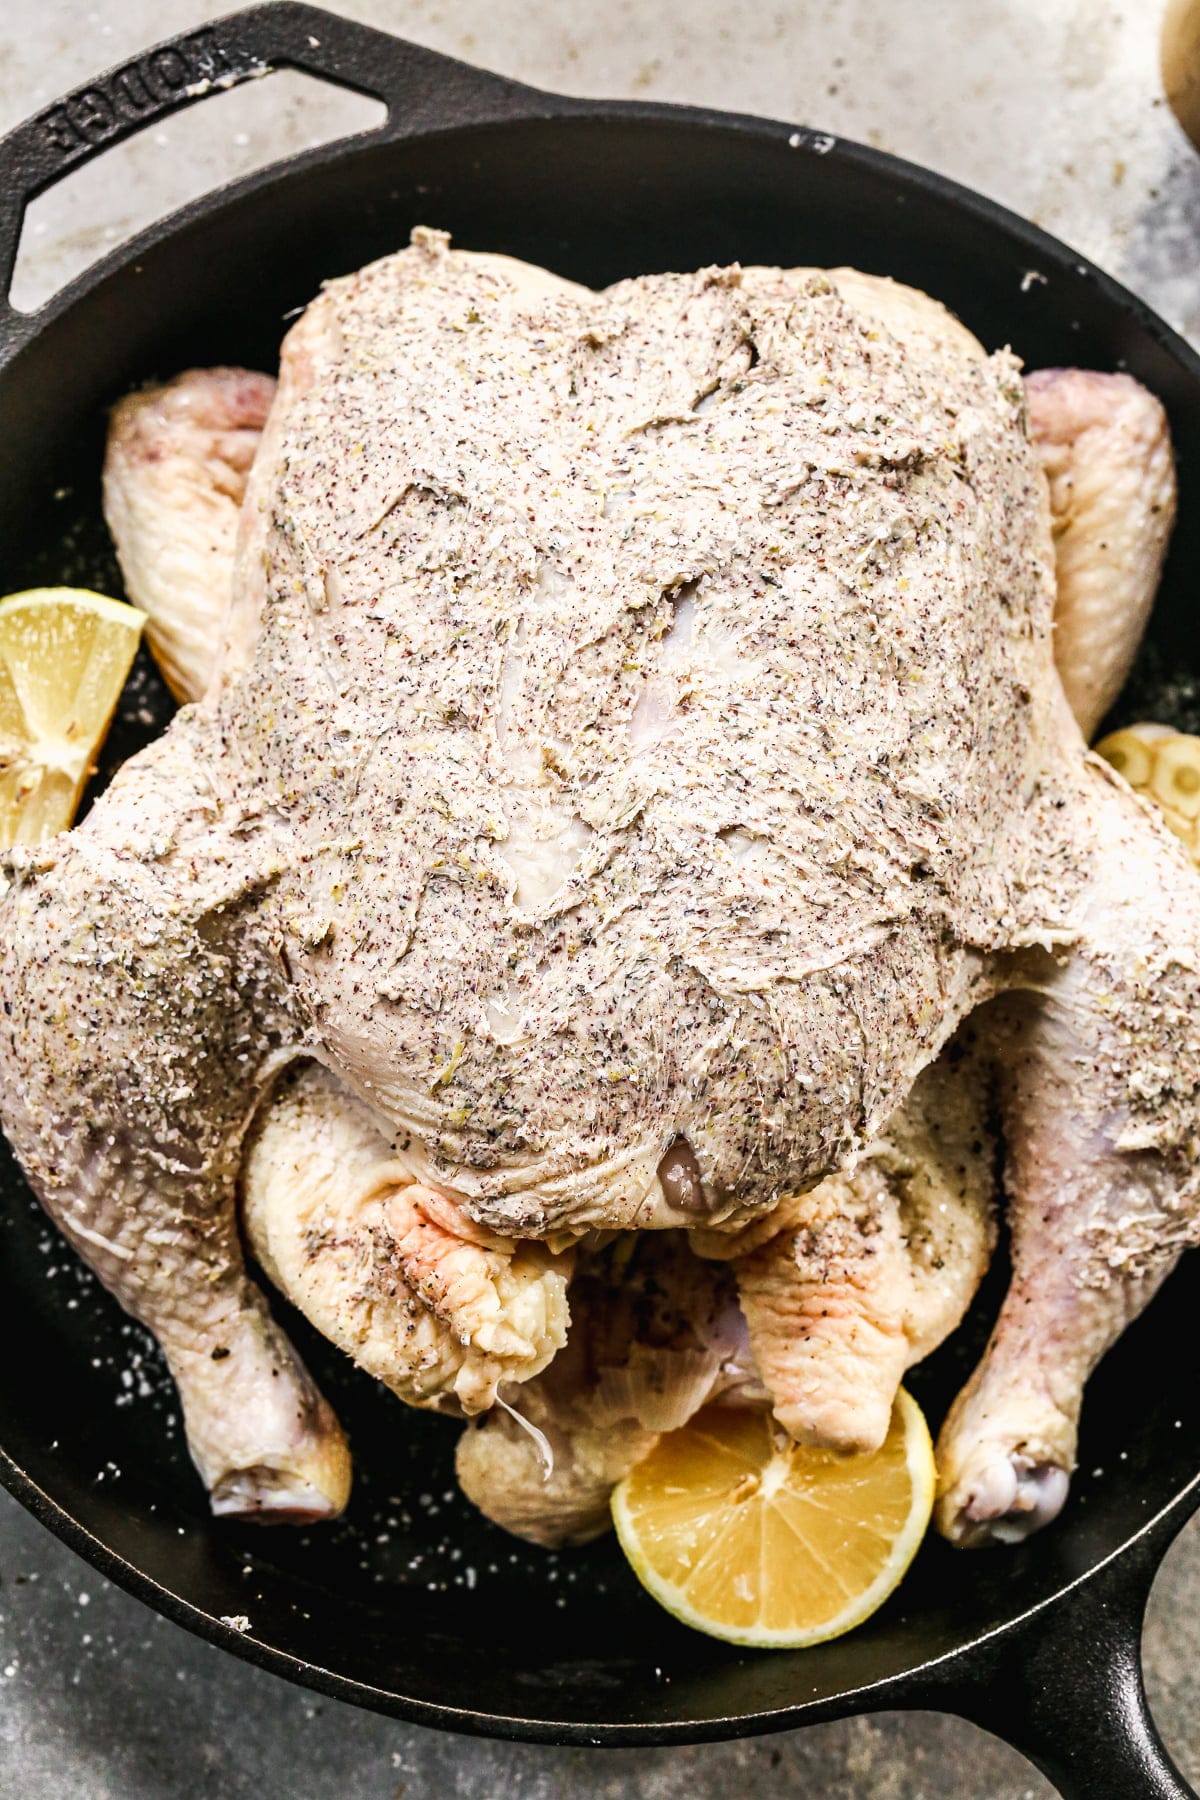 Rub chicken with butter